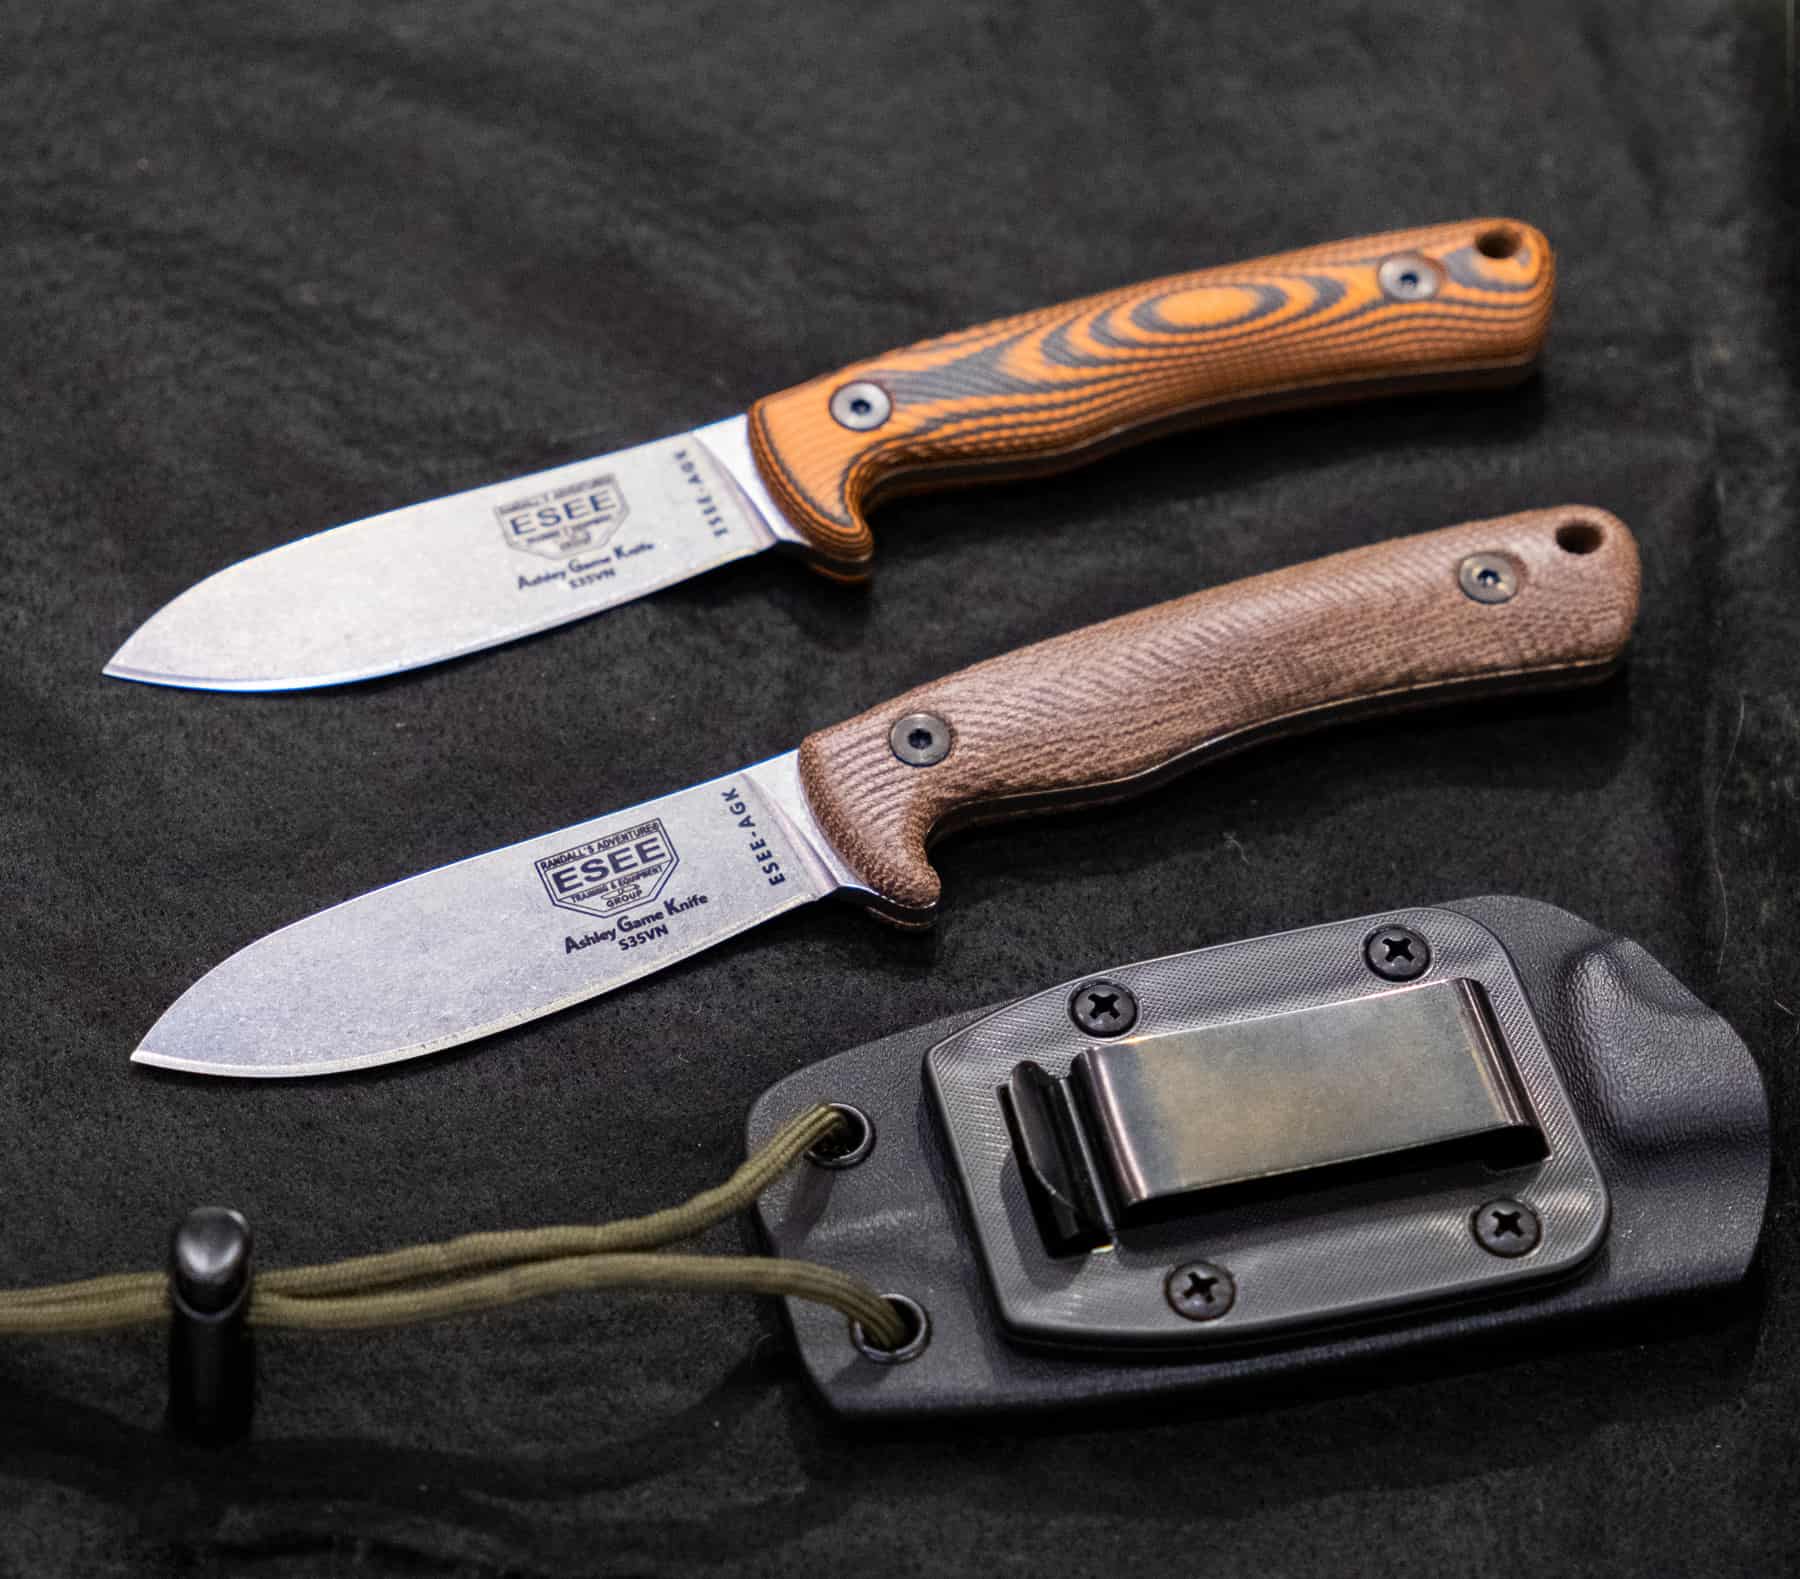 The small Esee AGK at Blade Show 2023.